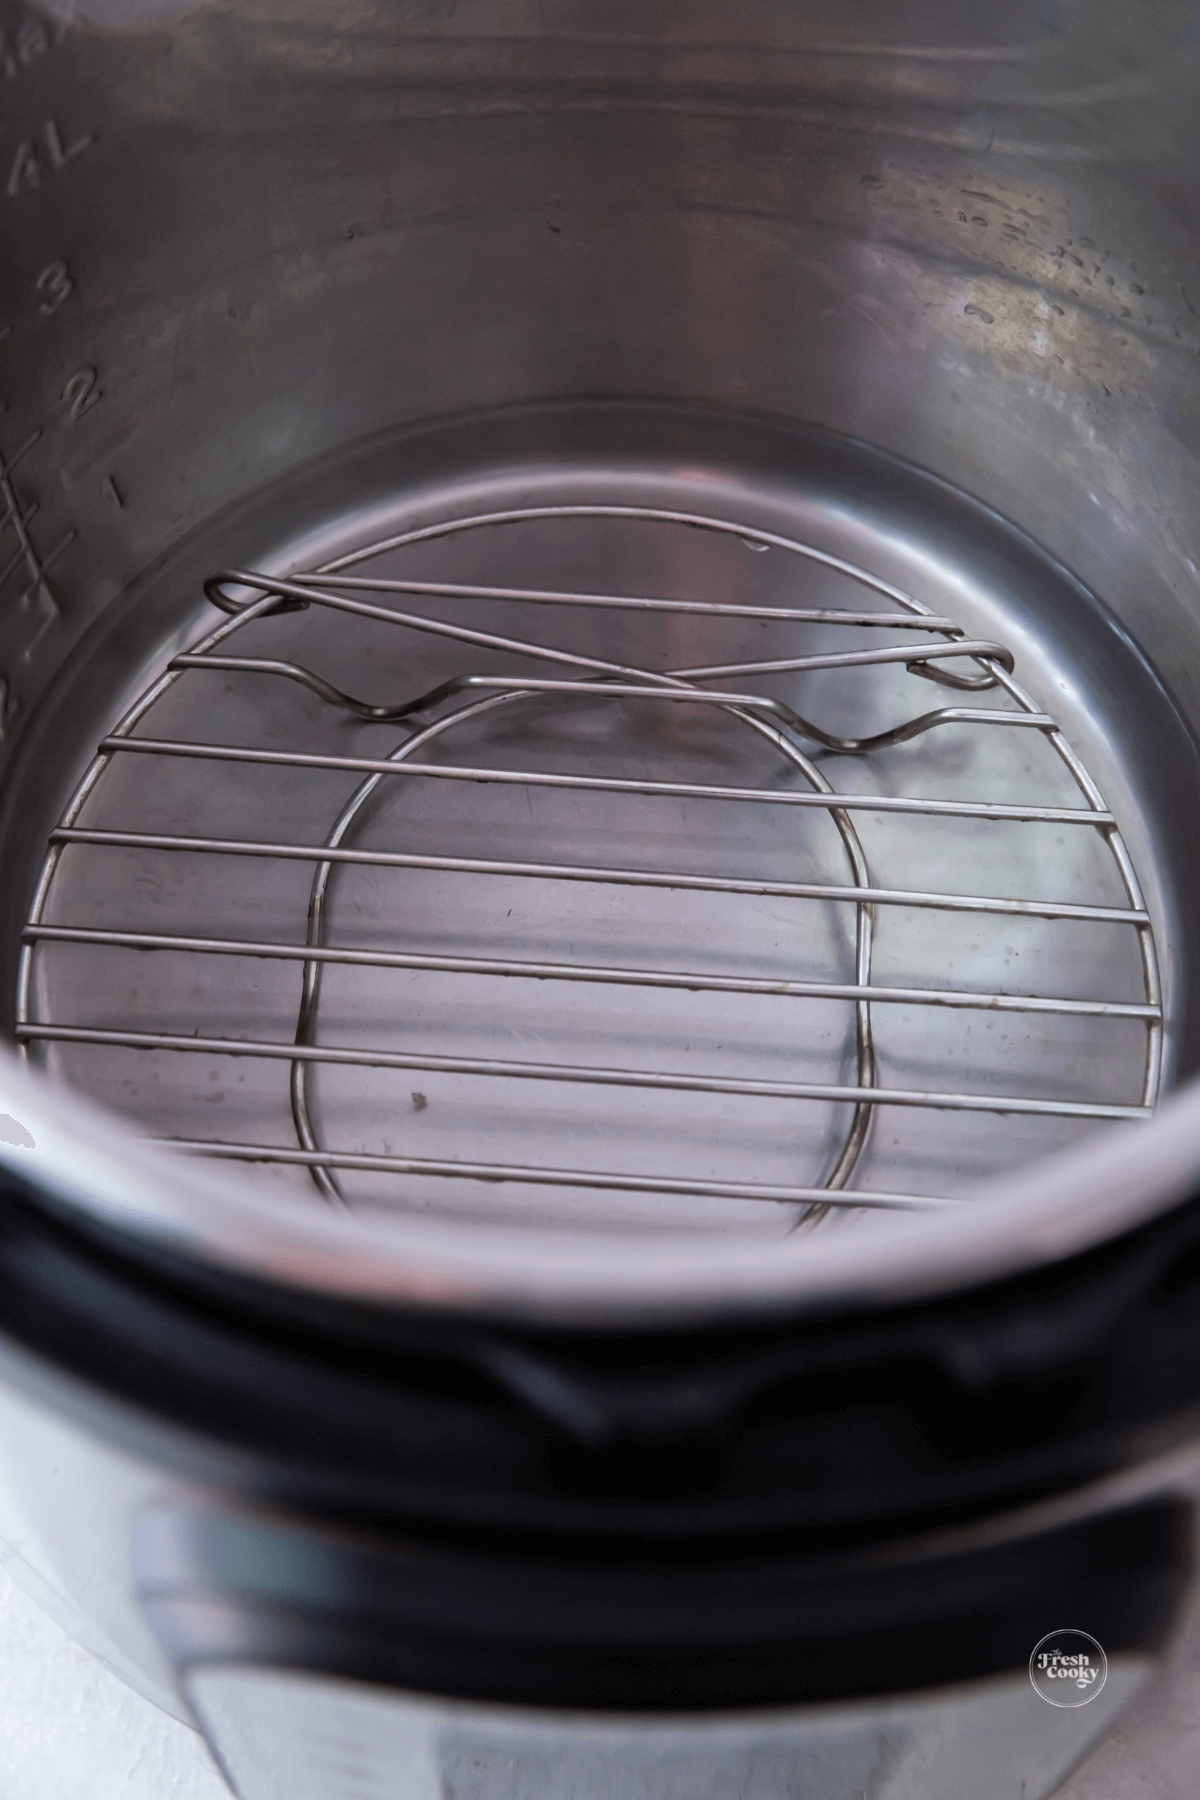 Place trivet in instant pot and a cup of water.